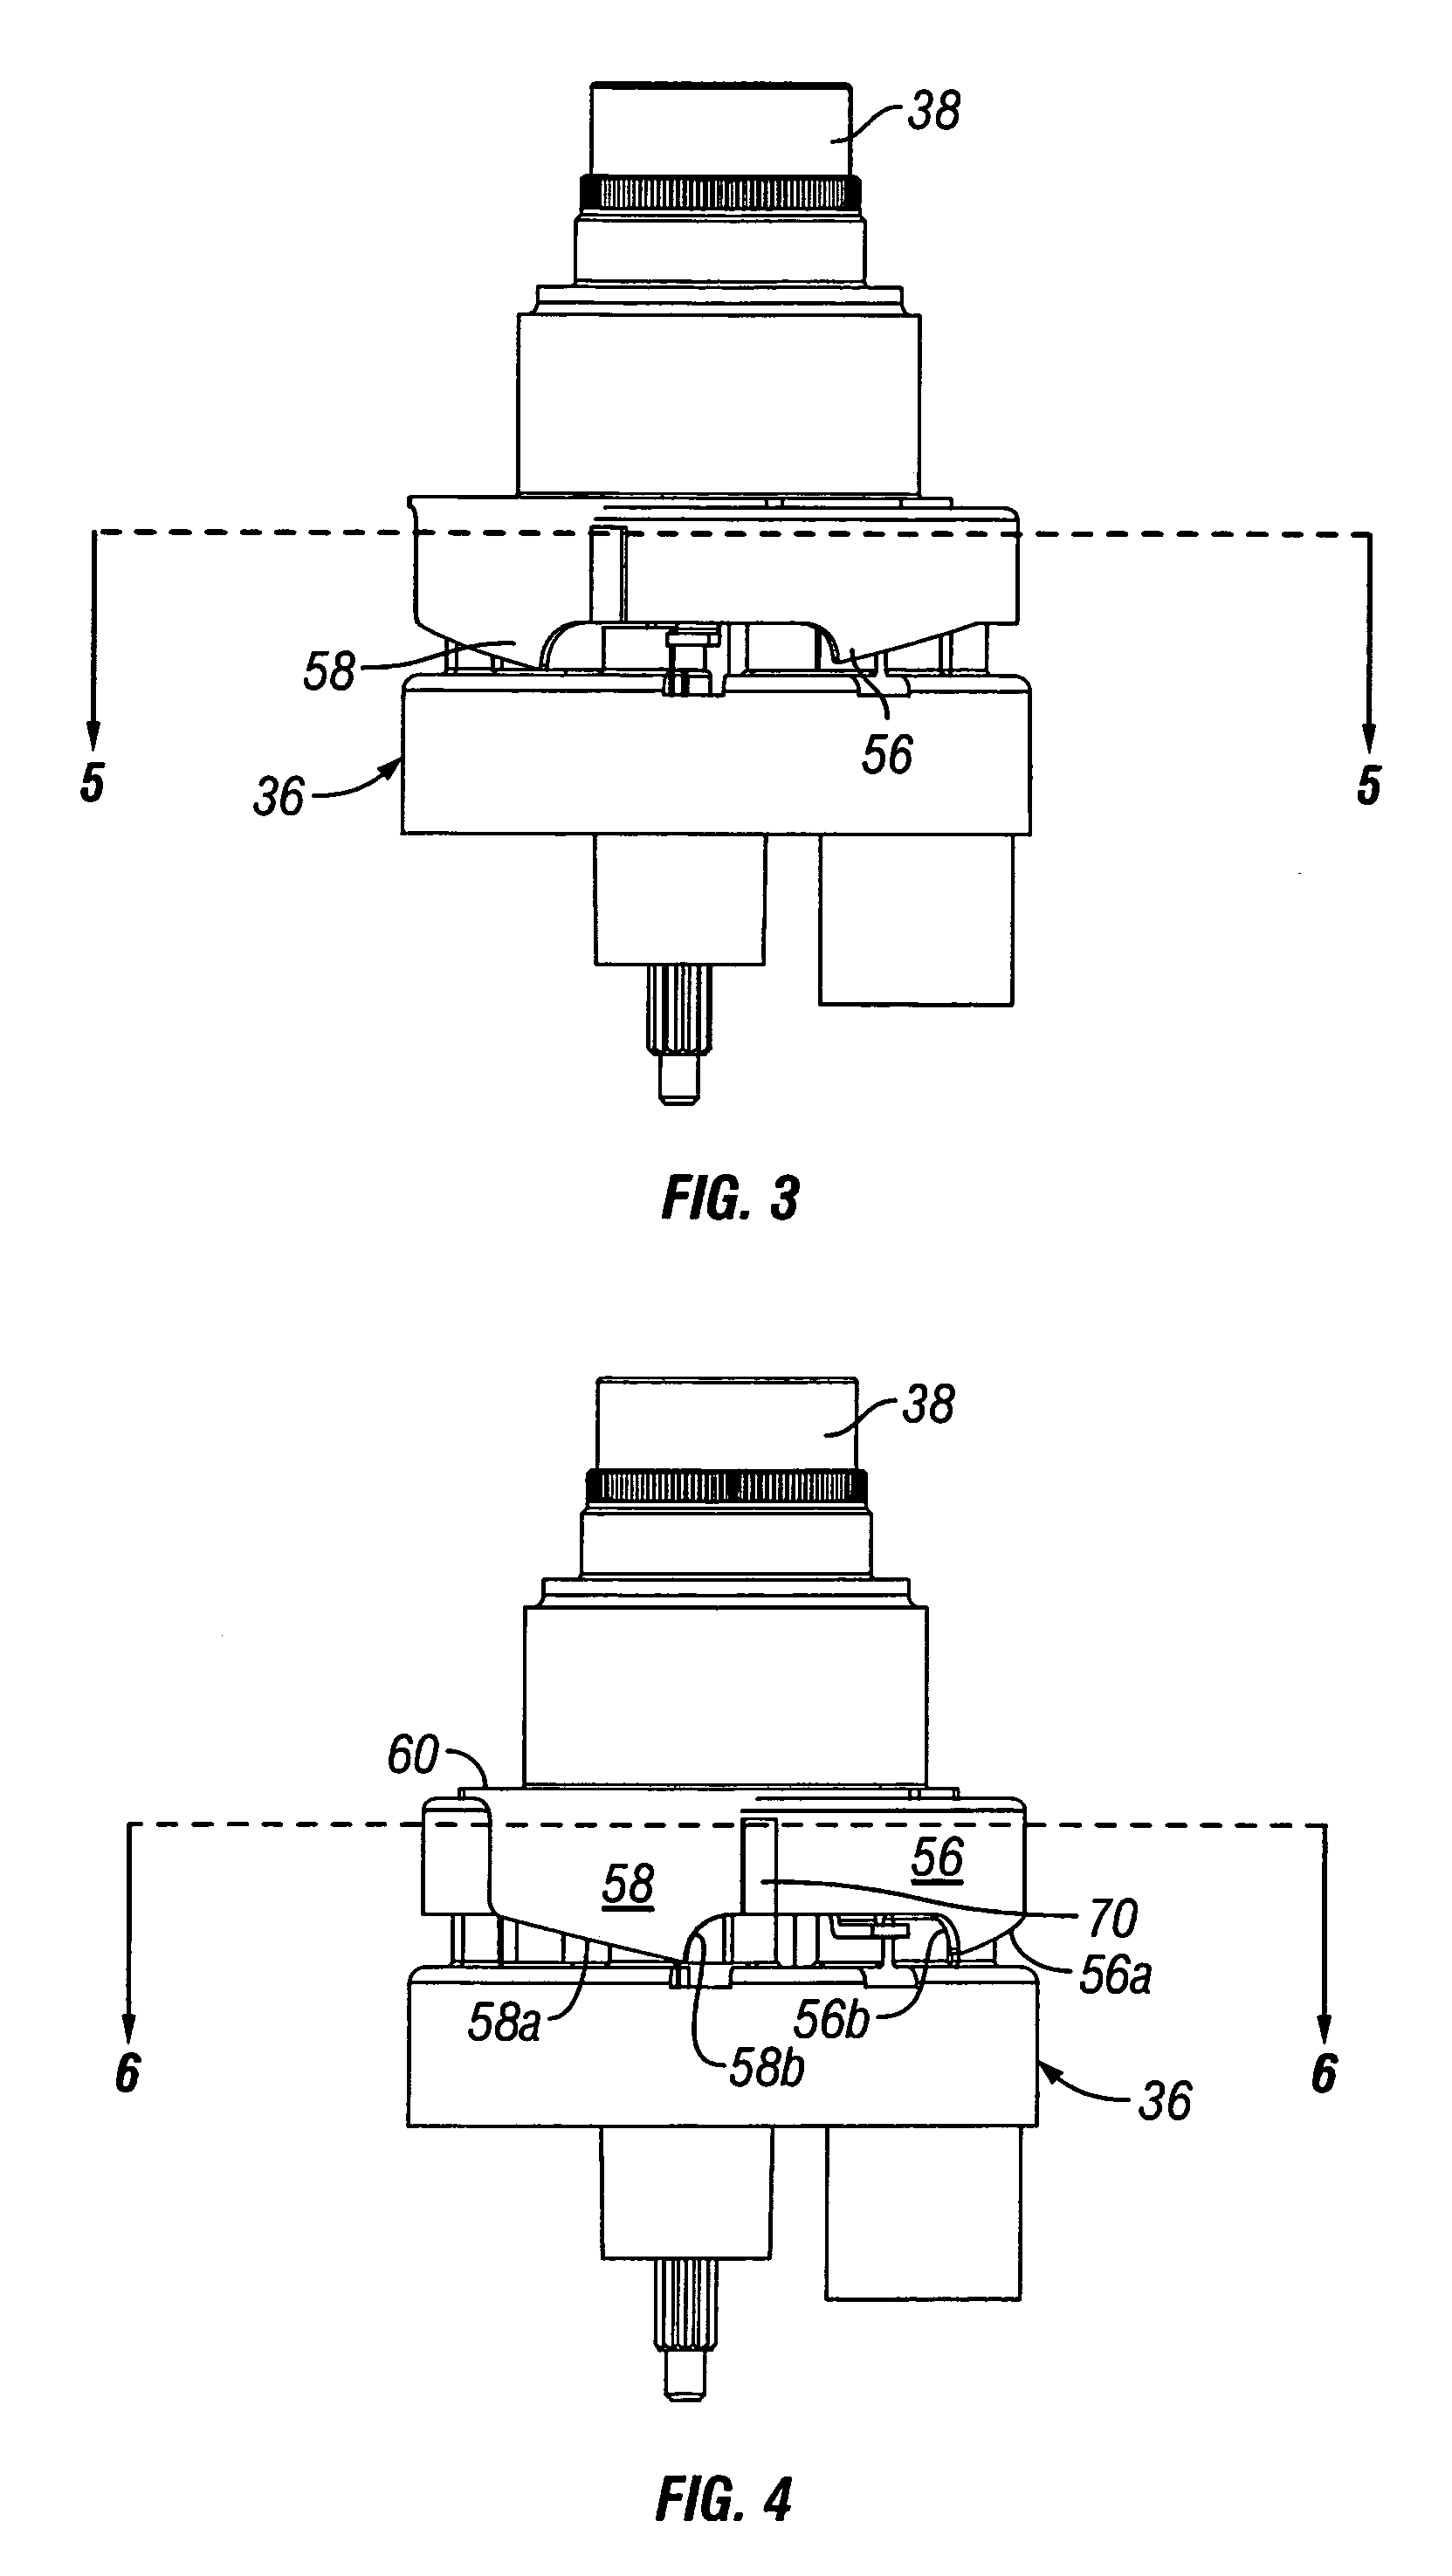 Adjustable arc rotor-type sprinkler with selectable uni-directional full circle nozzle rotation